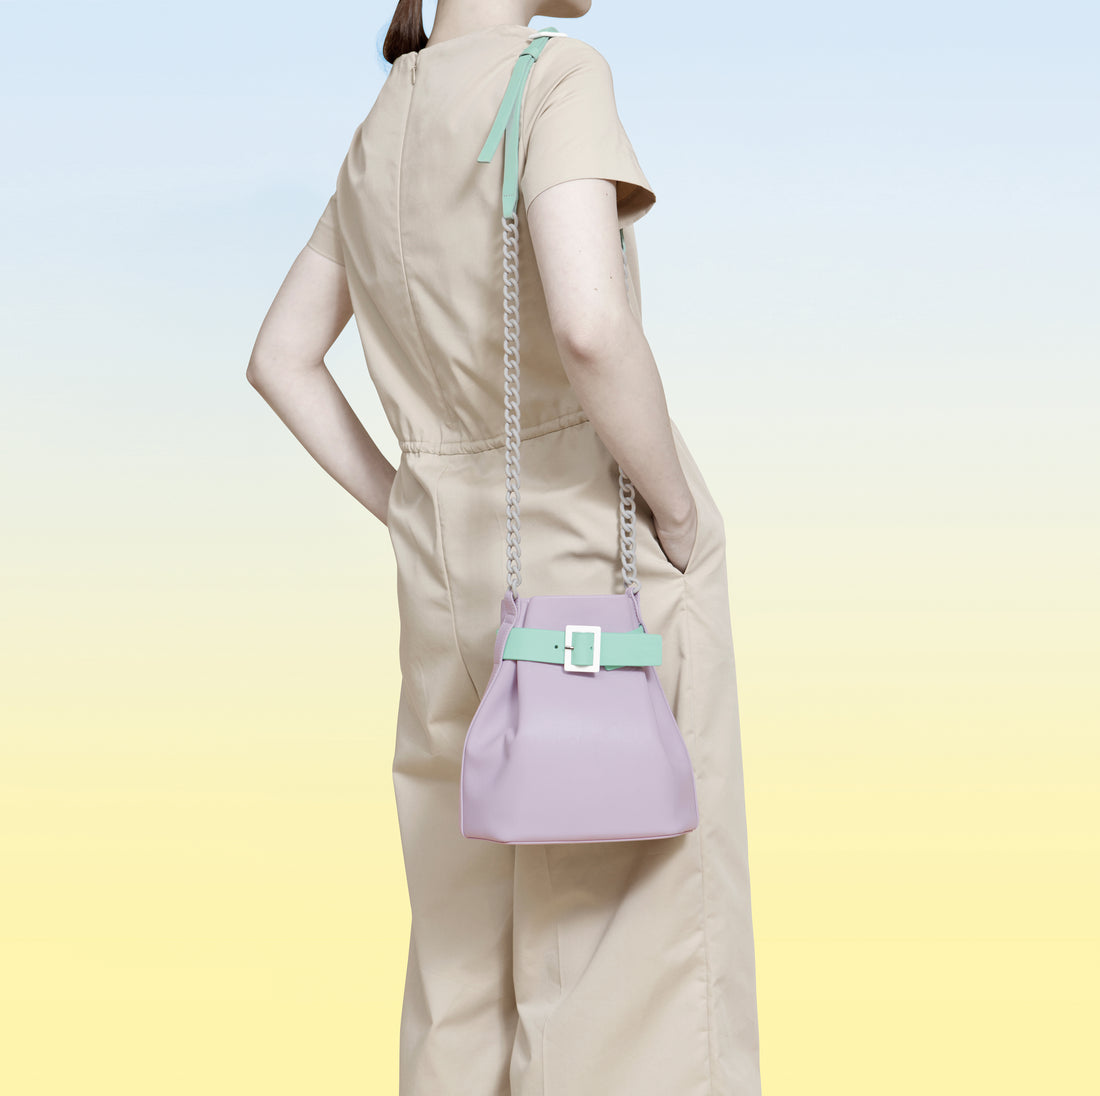 Mini Bucket Chained Bag • Lilac